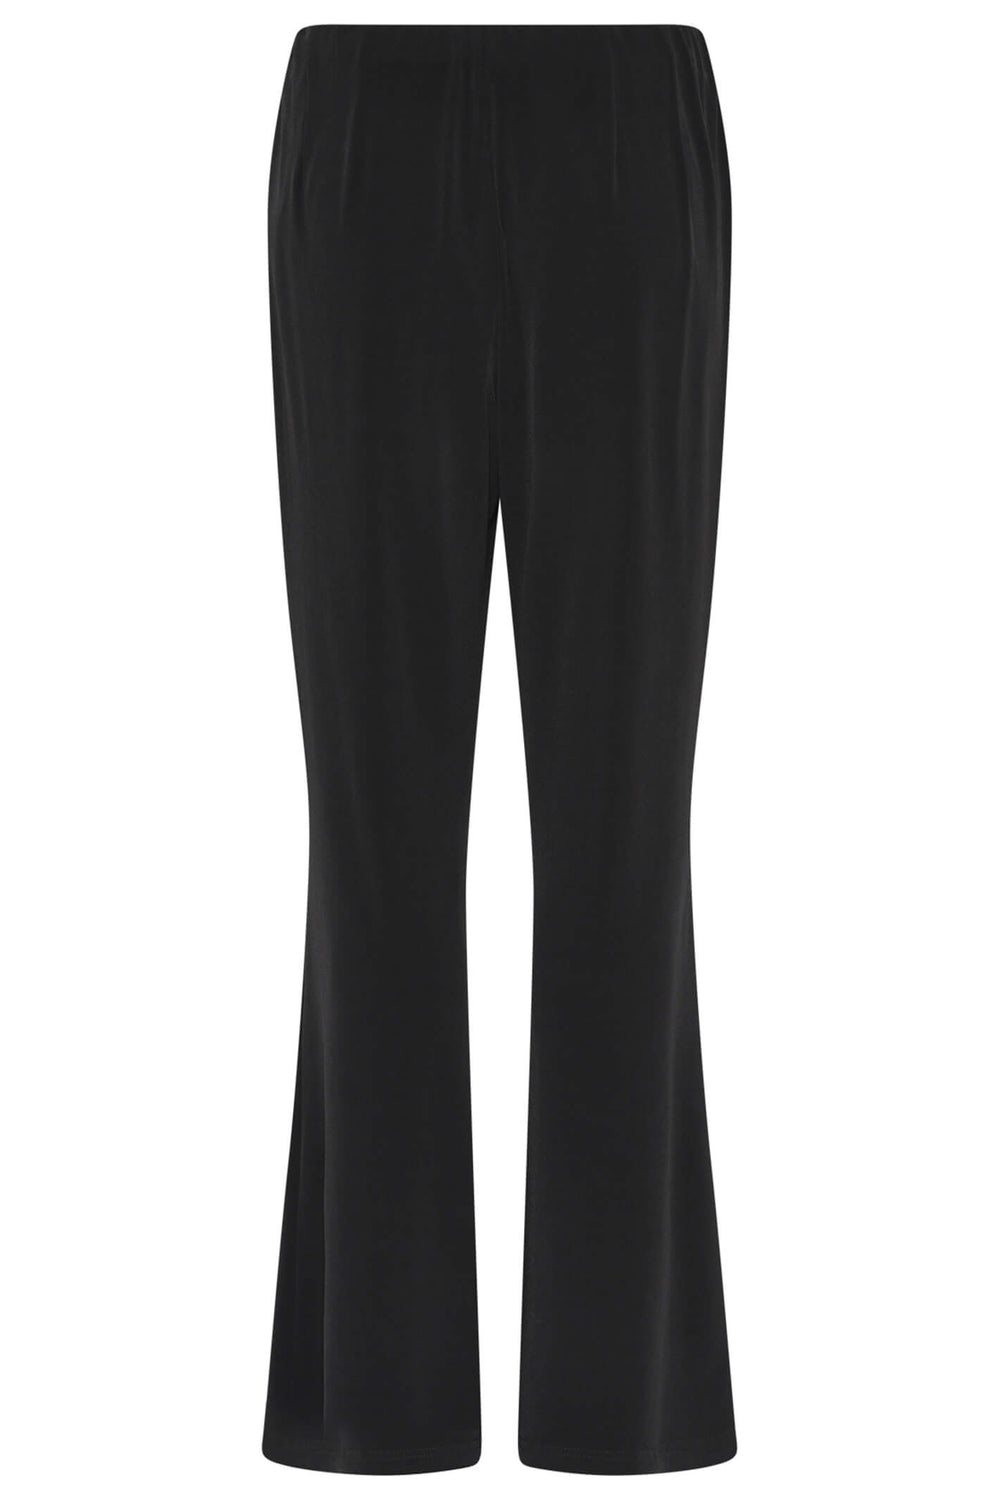 Tia 71306-7093 9000 Black Flared Pull-On Trousers - Dotique